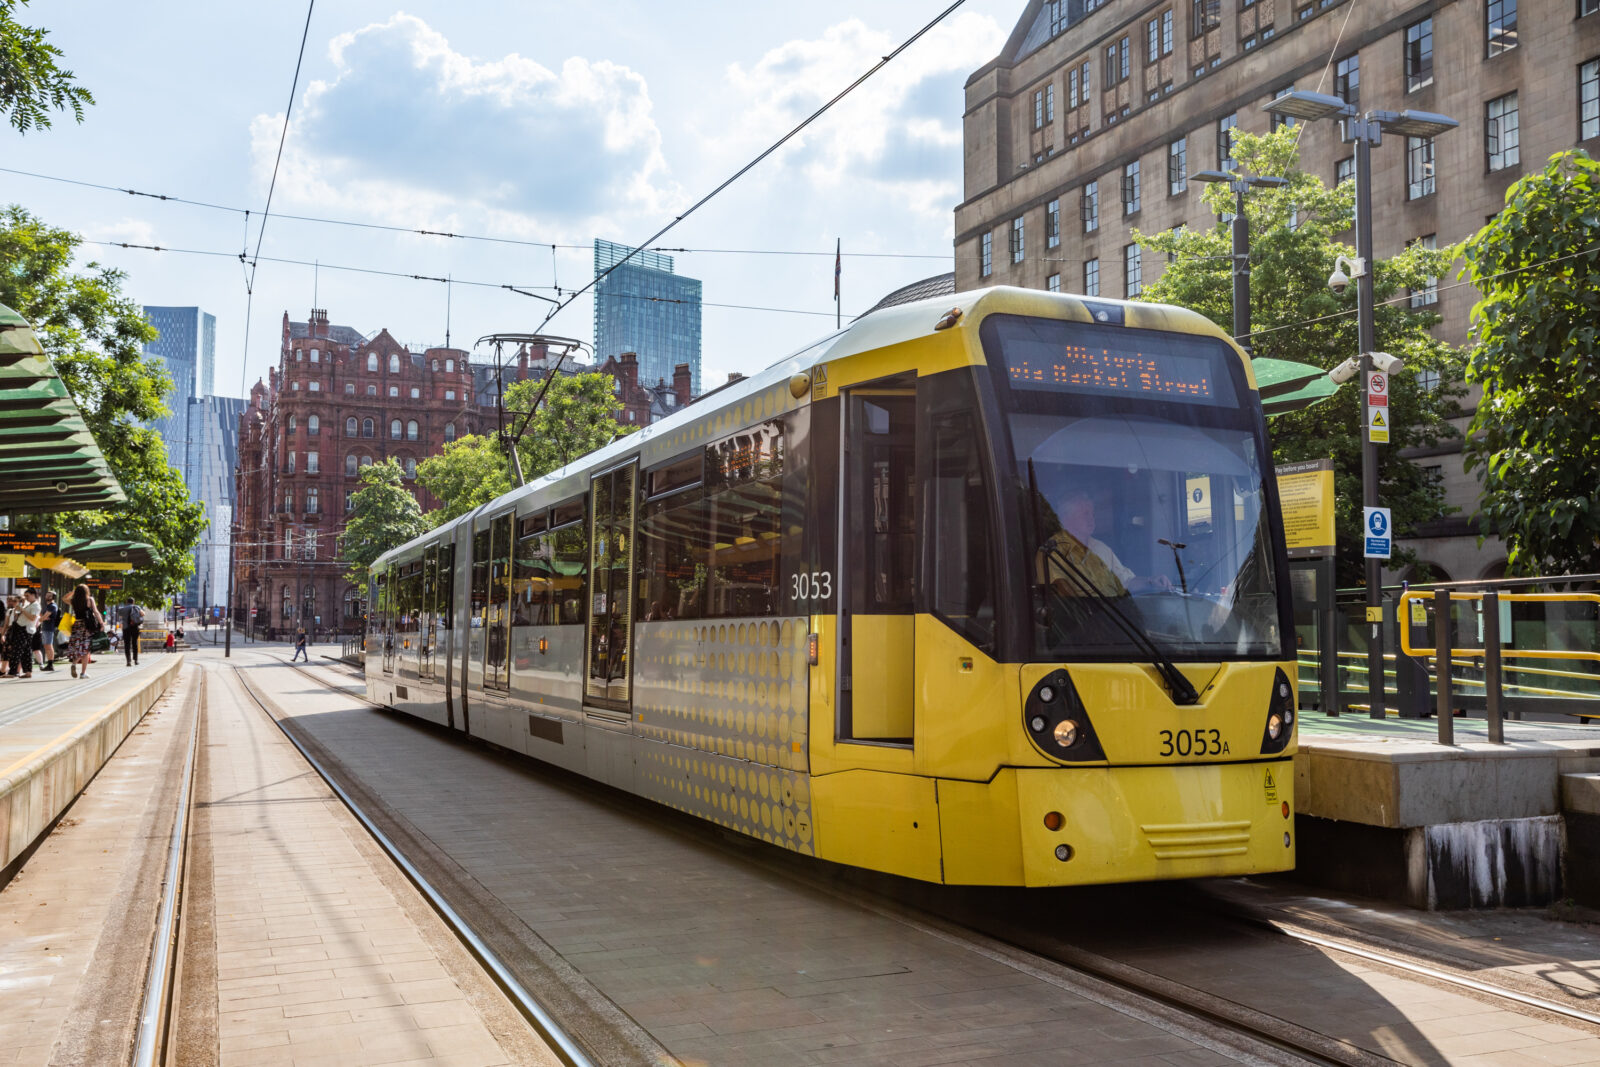 The Metrolink trams are one of the easiest ways to travel to Parklife